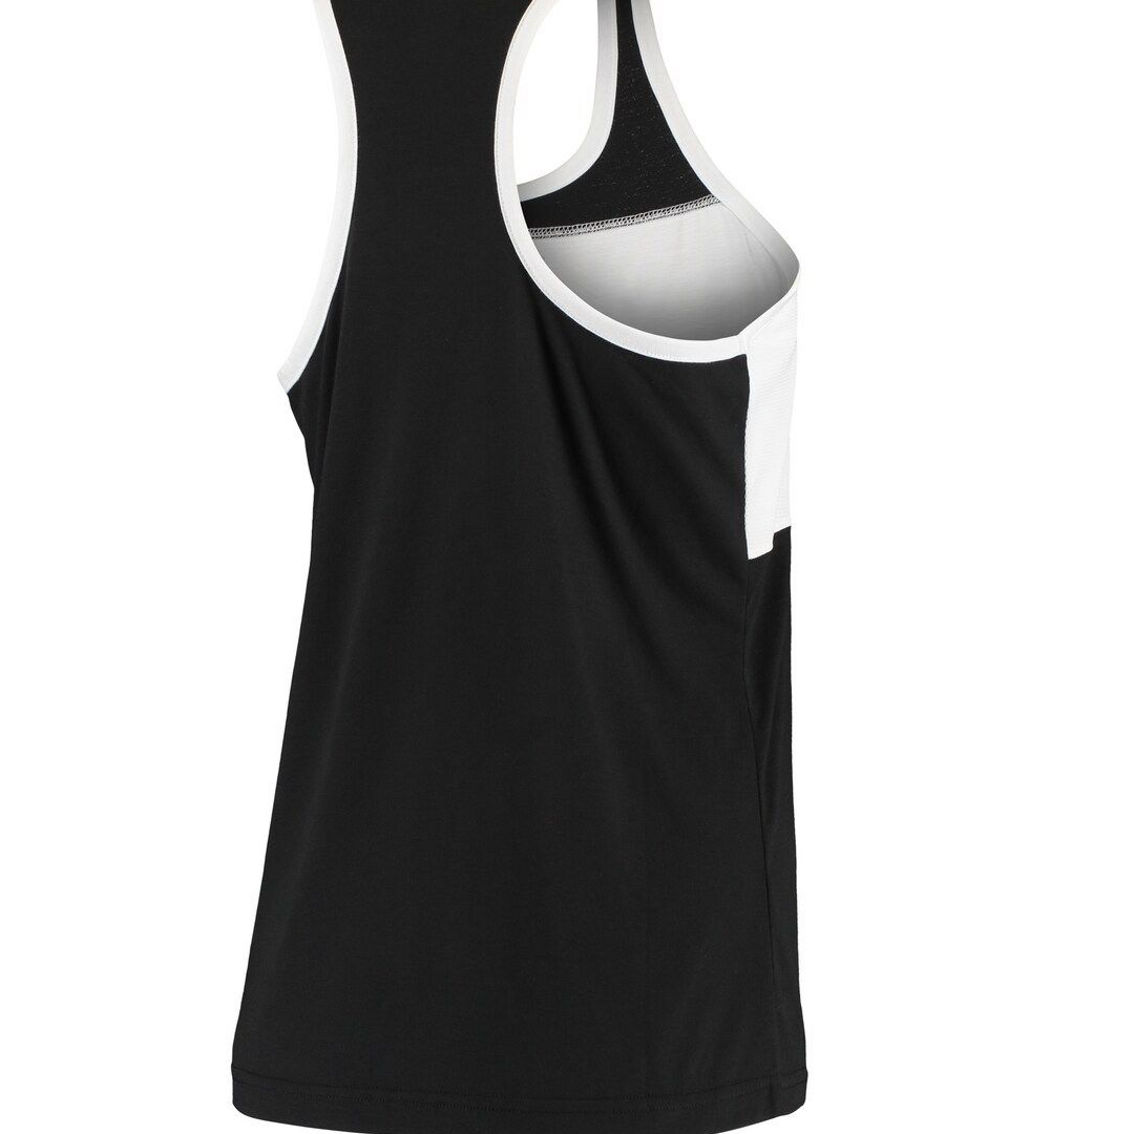 adidas Women's Black San Jose Earthquakes Finished Tank Top - Image 4 of 4